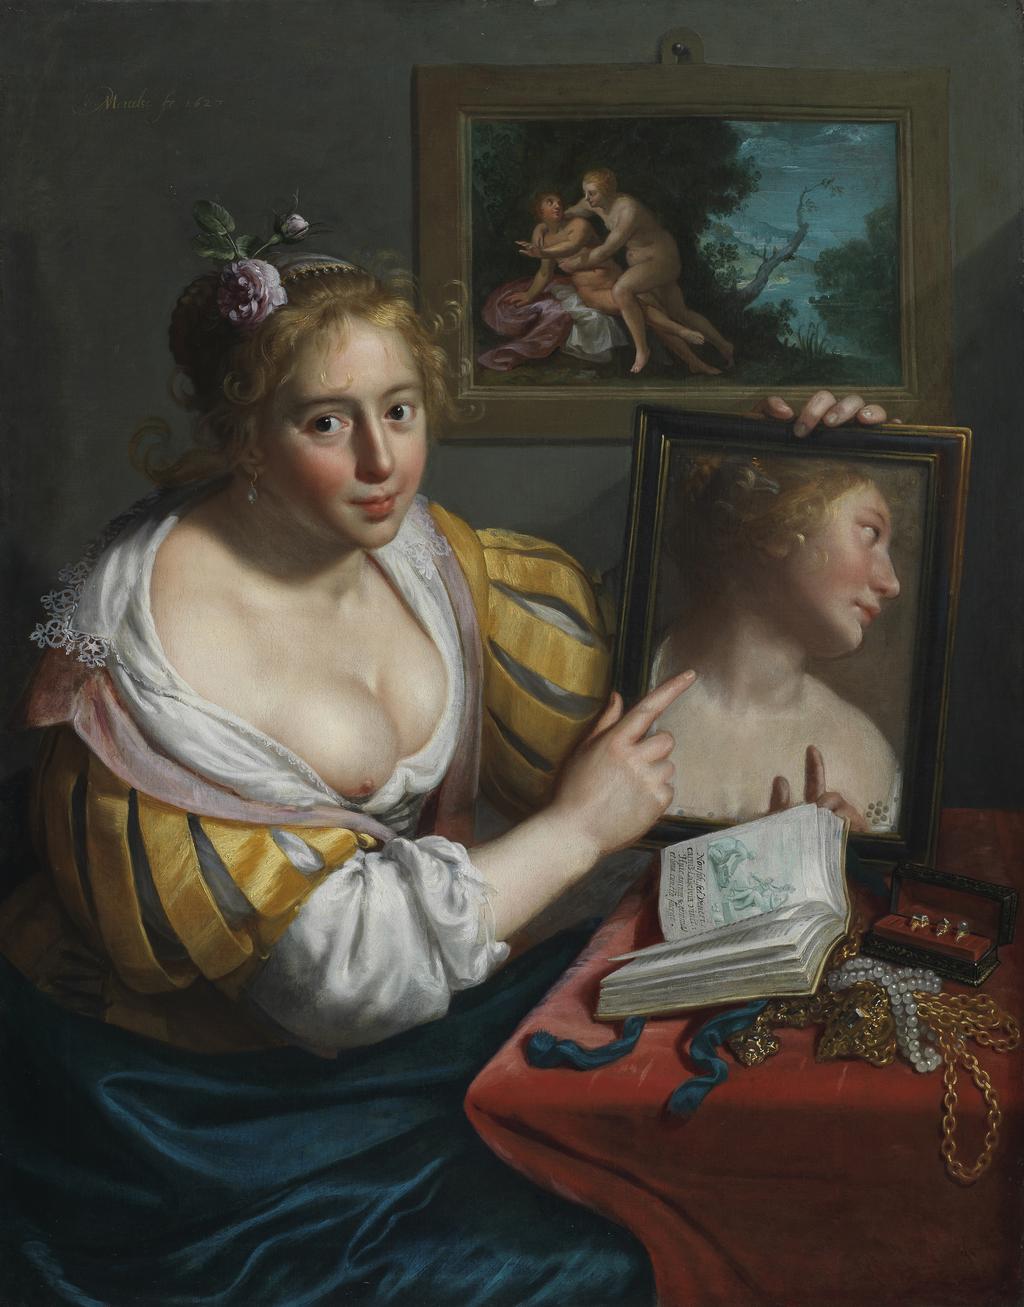 An image of A girl with a mirror, an allegory of Profane Love. Moreelse, Paulus (Dutch, 1571-1638). Oil on canvas, height 105.5 cm, width 83 cm, 1627.